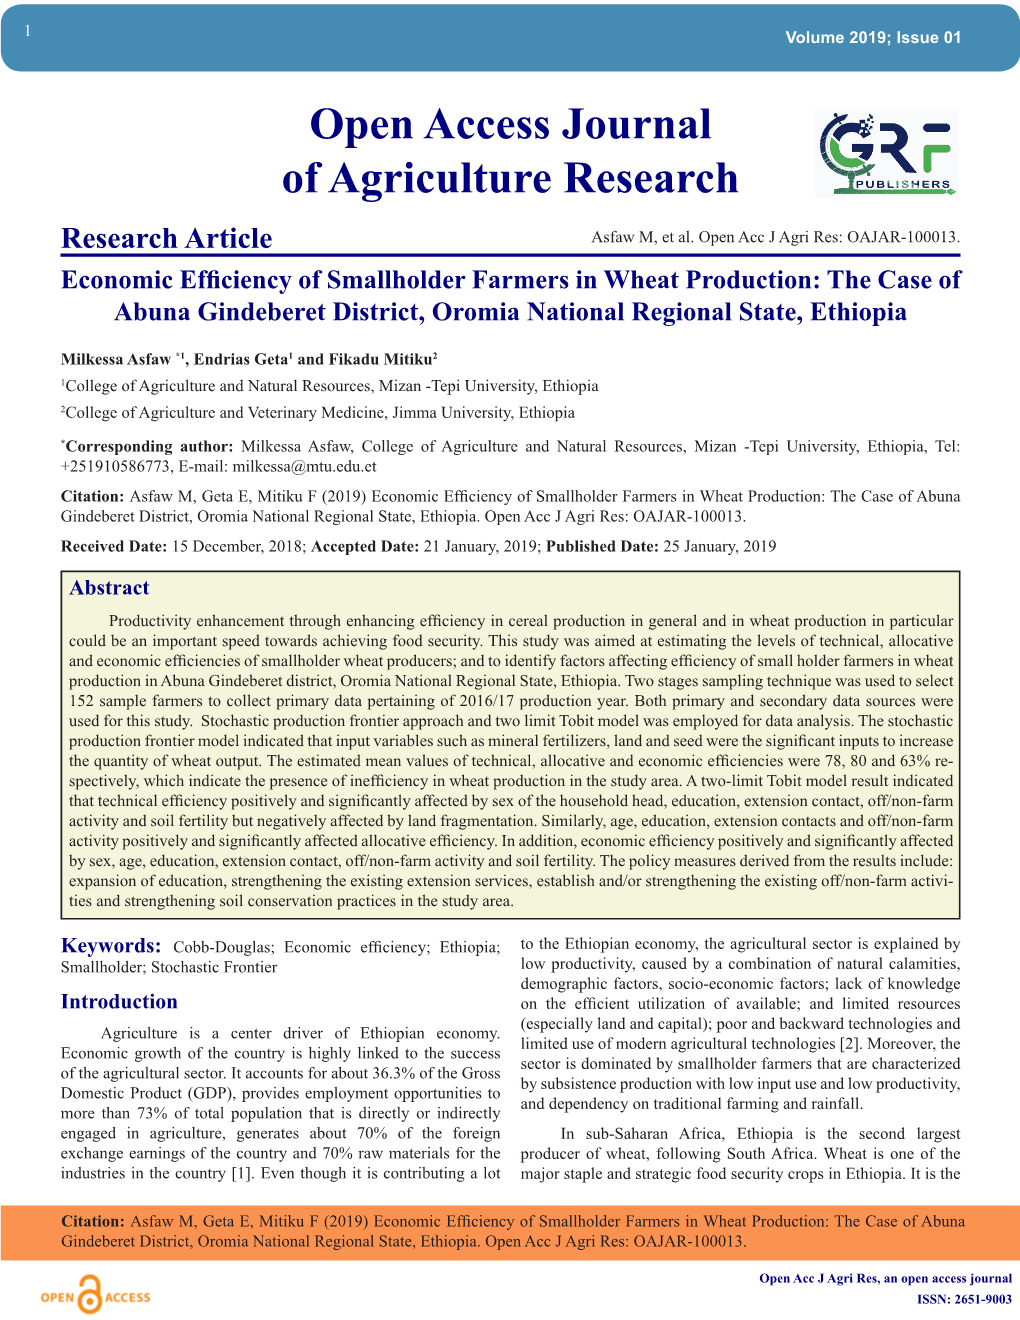 Open Access Journal of Agriculture Research Research Article Asfaw M, Et Al